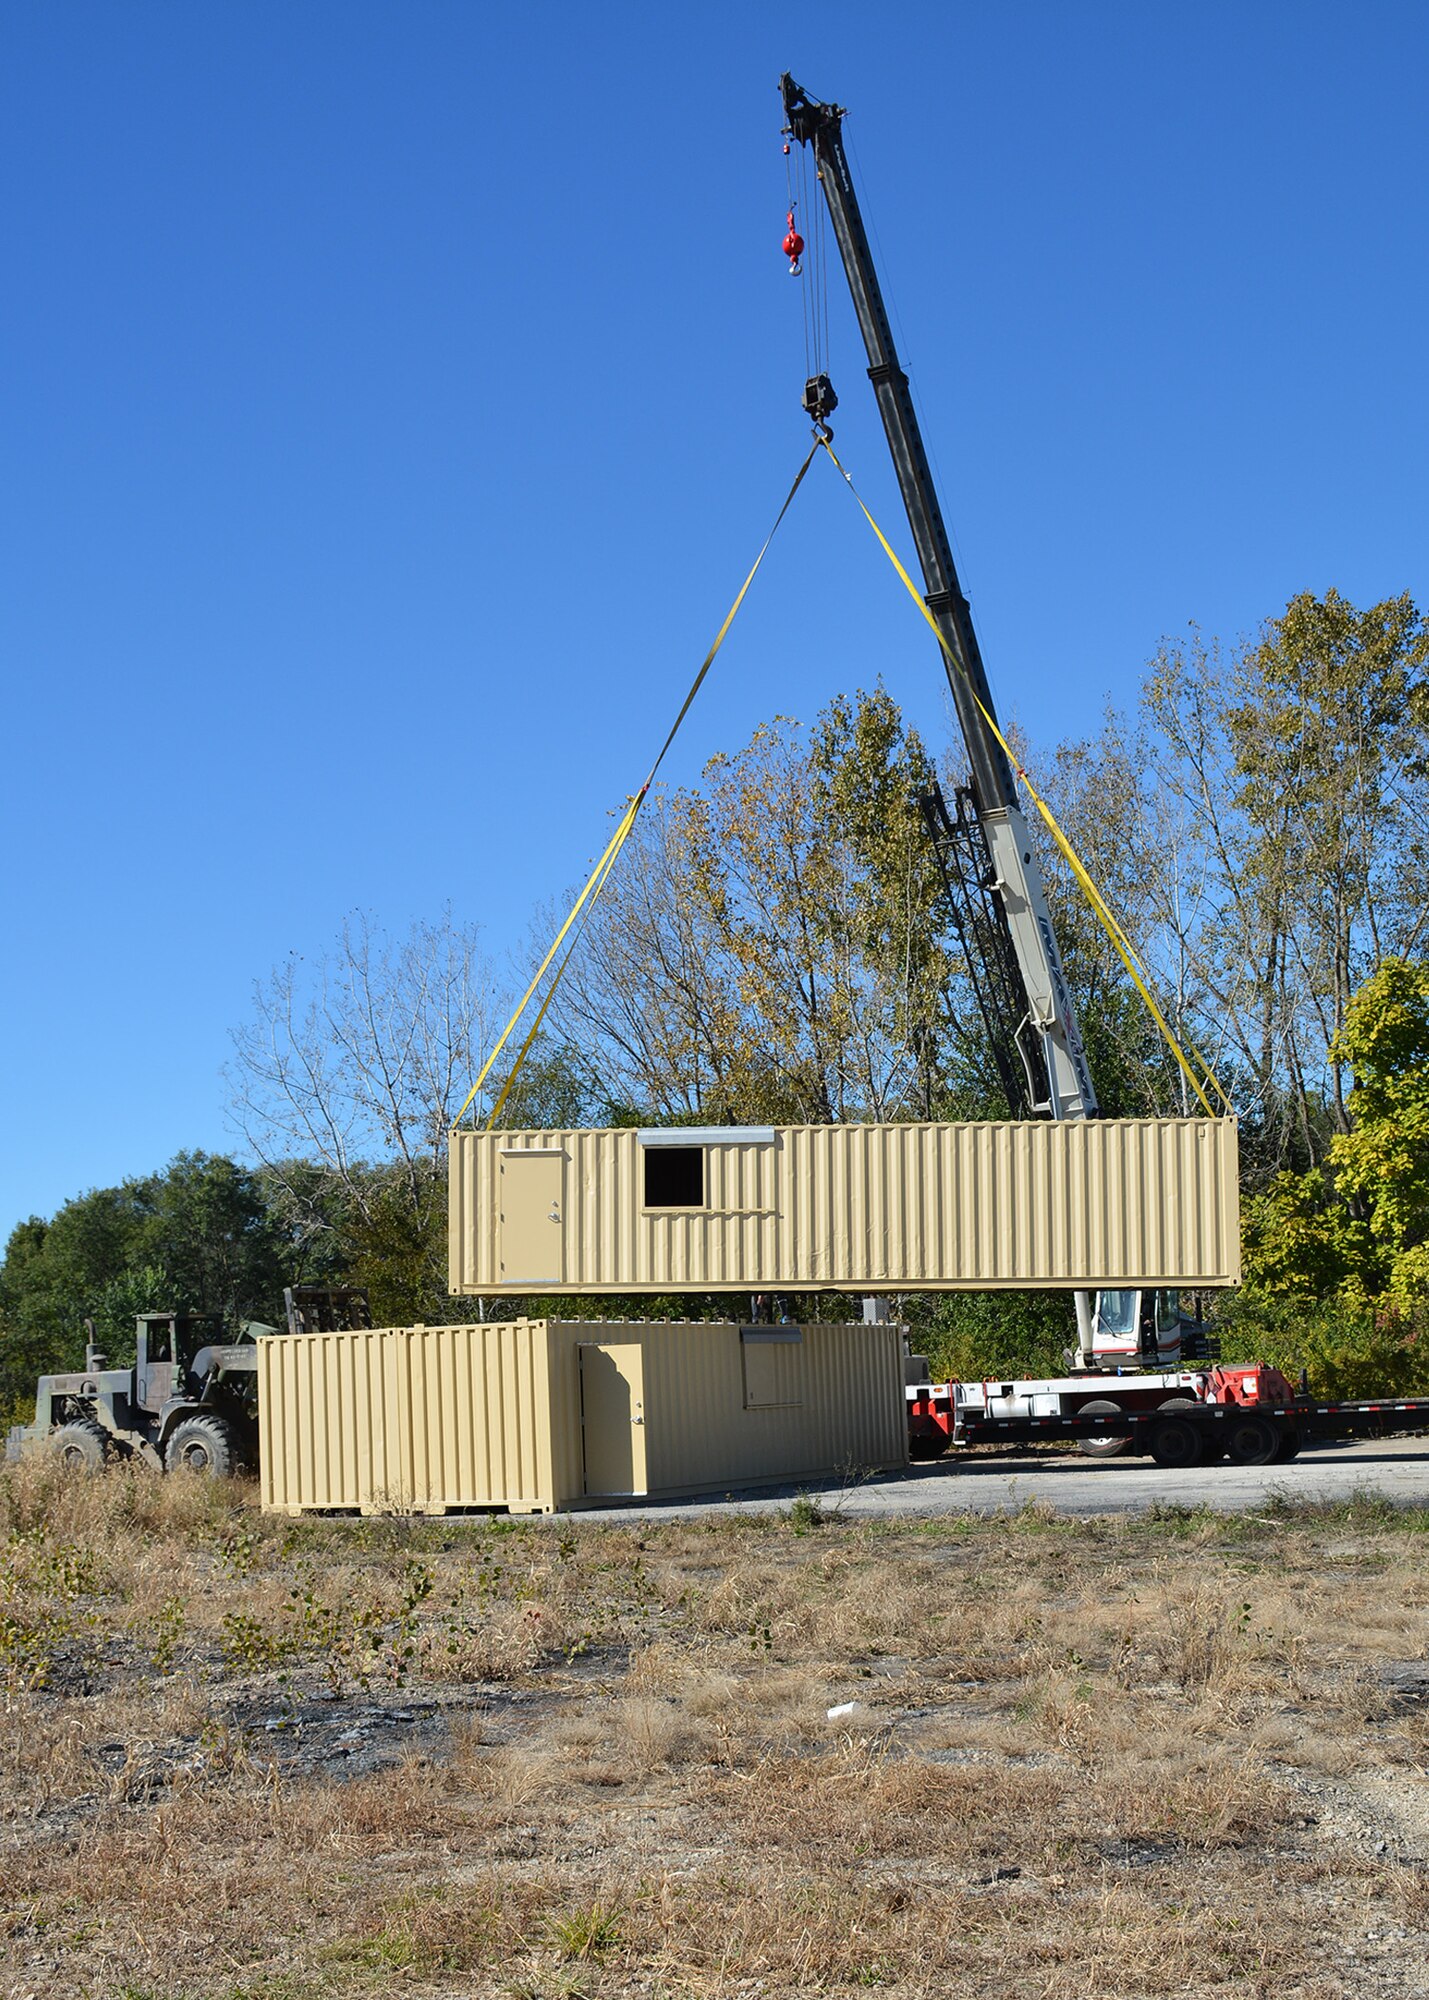 The National Center for Medical Readiness received delivery of a Conex “hotel,” Oct. 23, 2018, which includes three 12,000-pound structures, to be incorporated with future training and testing events taking place at the tactical training facility. (U.S. Air Force photo/Lori Hughes)